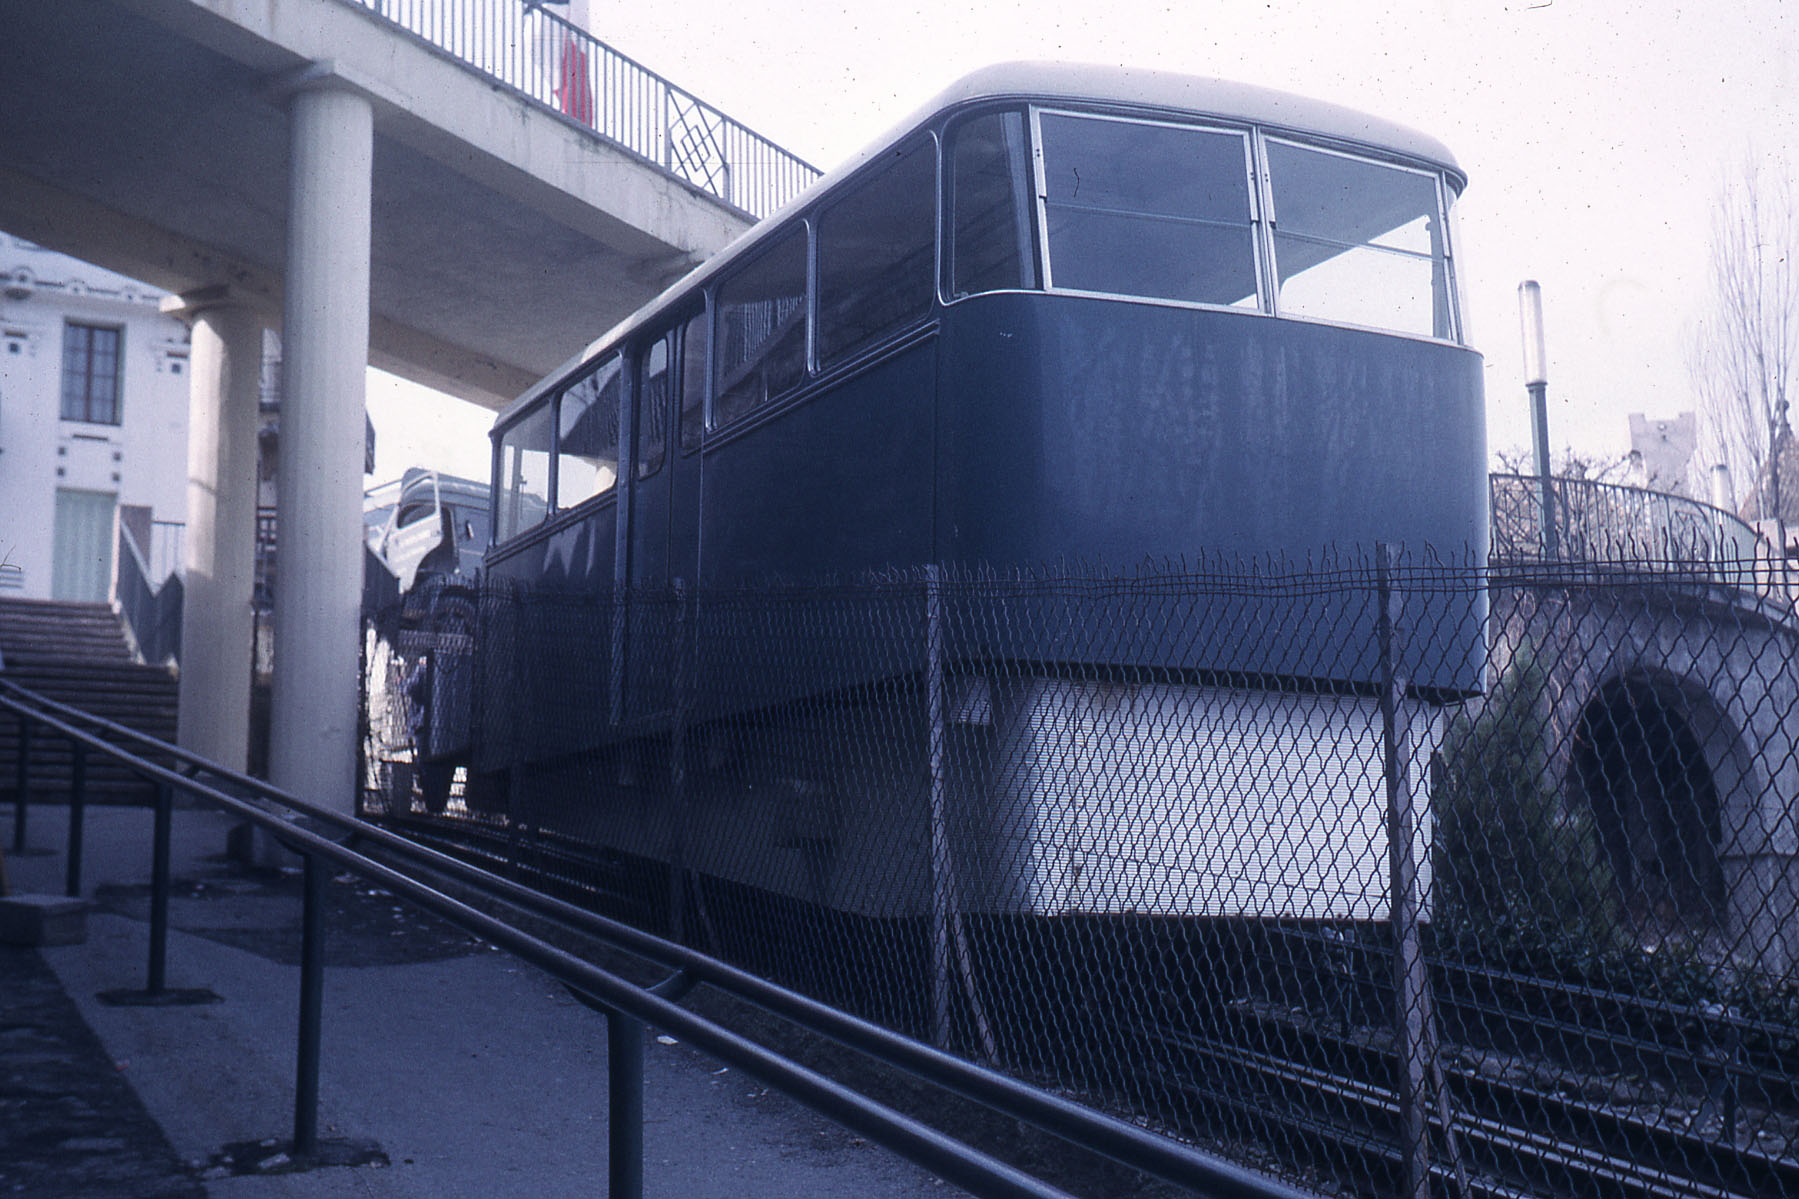 Le funiculaire de Rives à Thonon 1965 / Funicular from Rives to Thonon in 1965